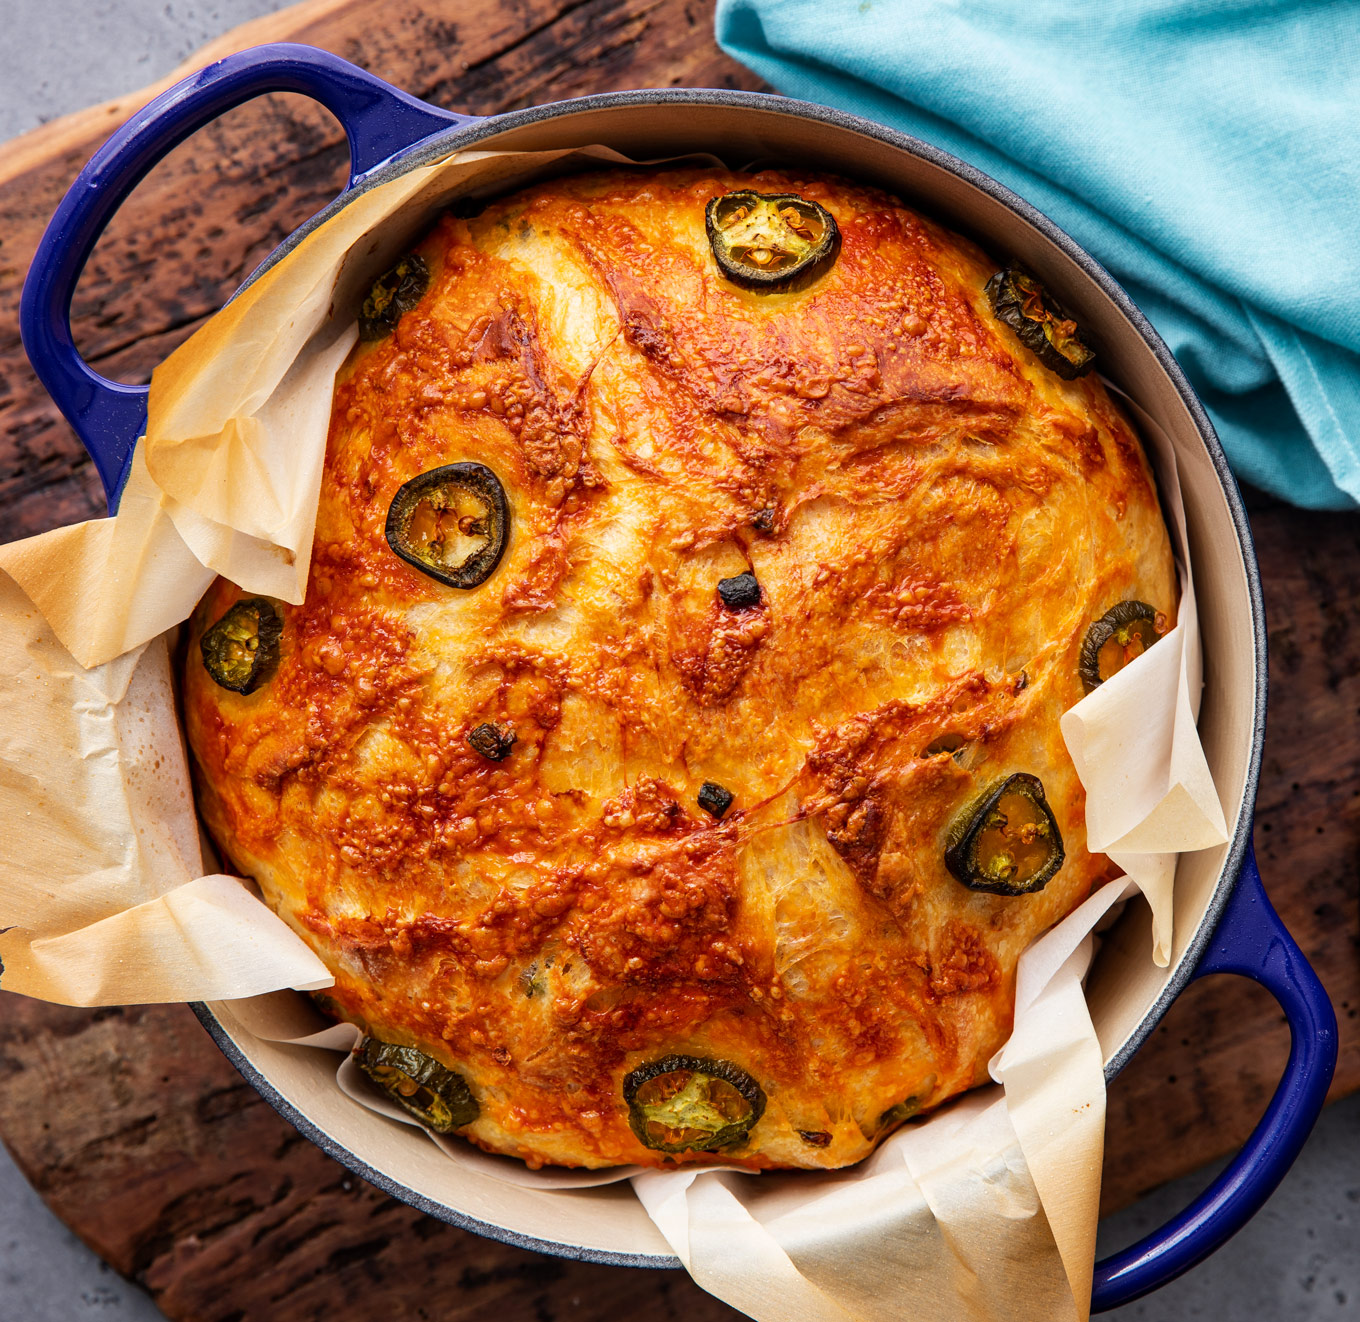 https://www.thechunkychef.com/wp-content/uploads/2020/04/Jalapeno-Cheddar-Dutch-Oven-Bread-pot.jpg